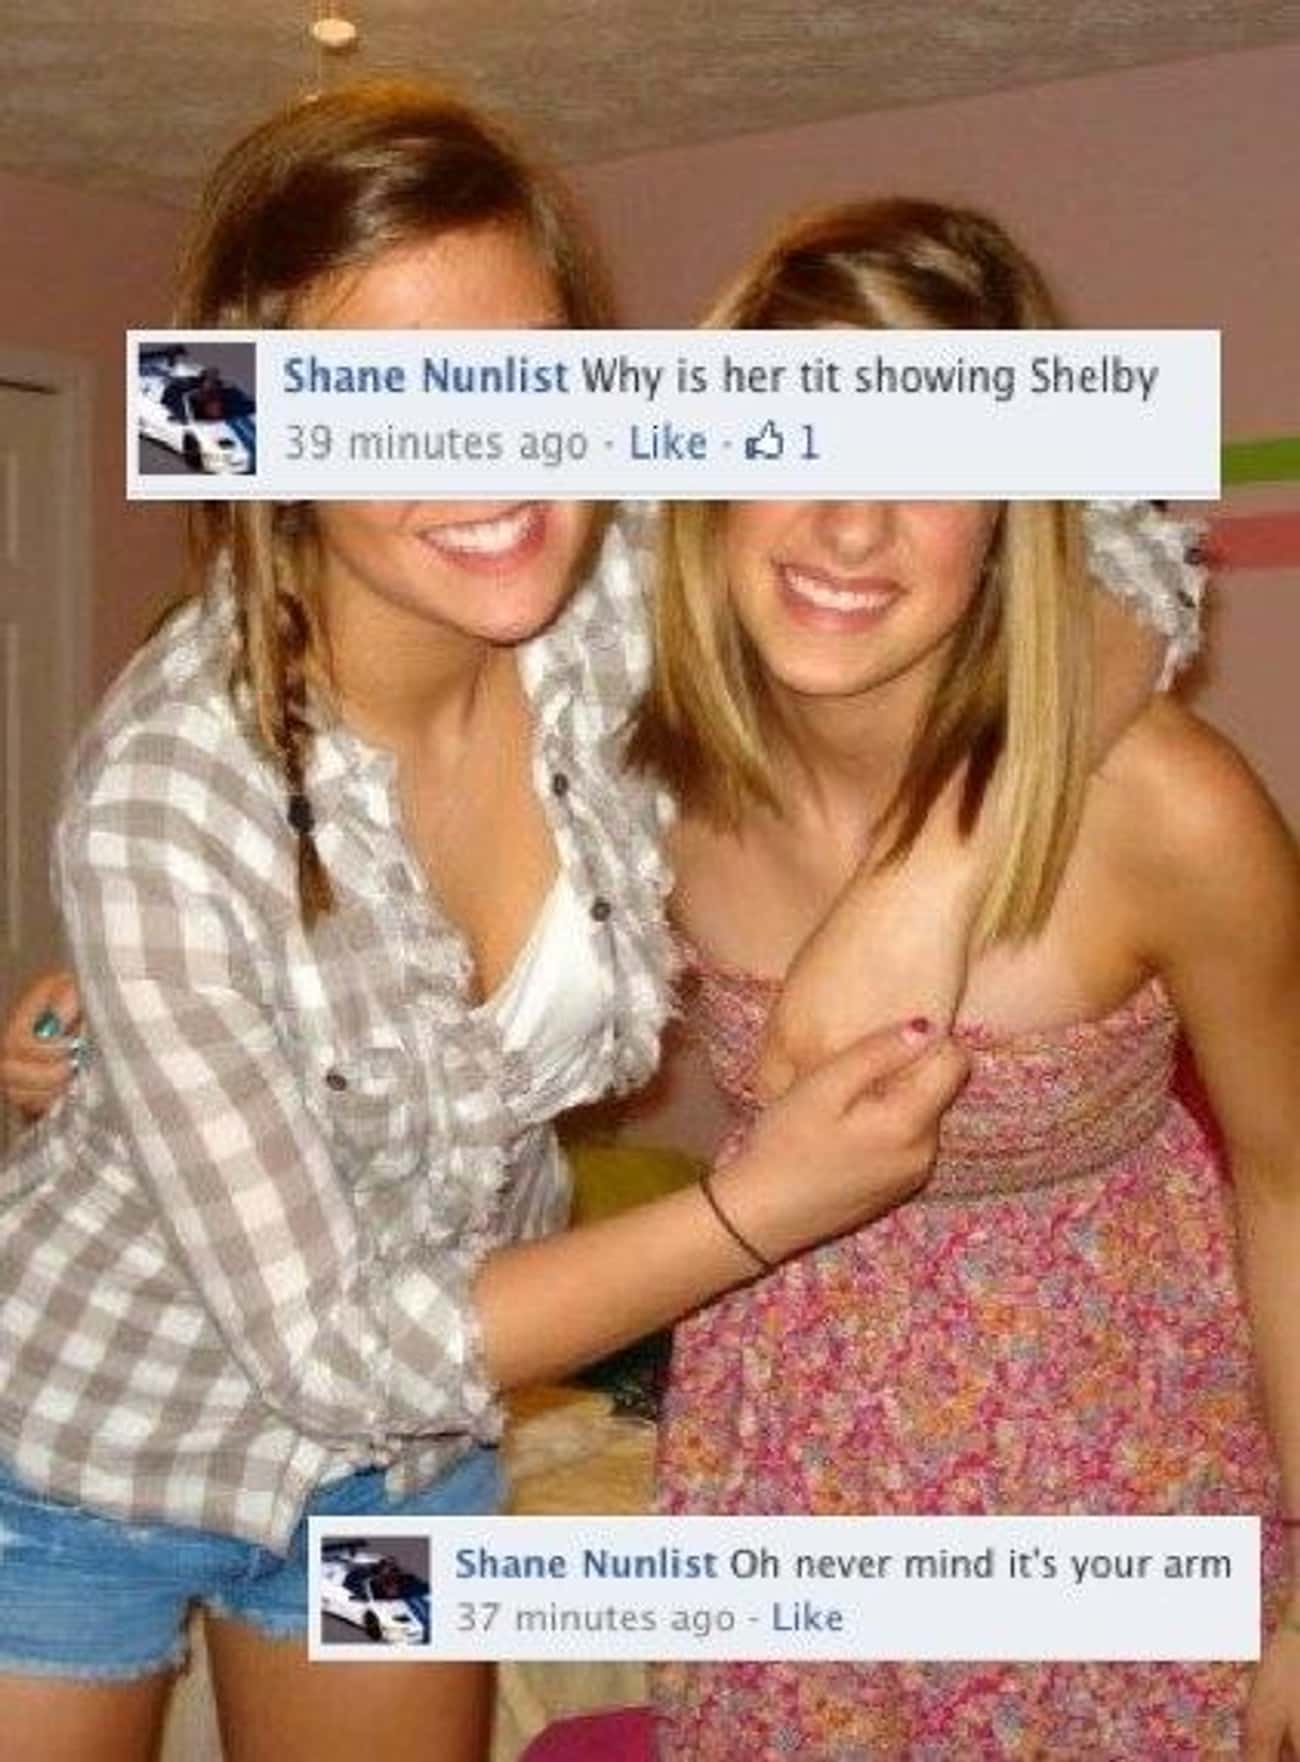 Innocent Pics that seem dirty - dirty mind dirty funny memes - Shane Nunlist Why is her tit showing Shelby 39 minutes ago l Shane Nunlist Oh never mind it's your arm 37 minutes ago